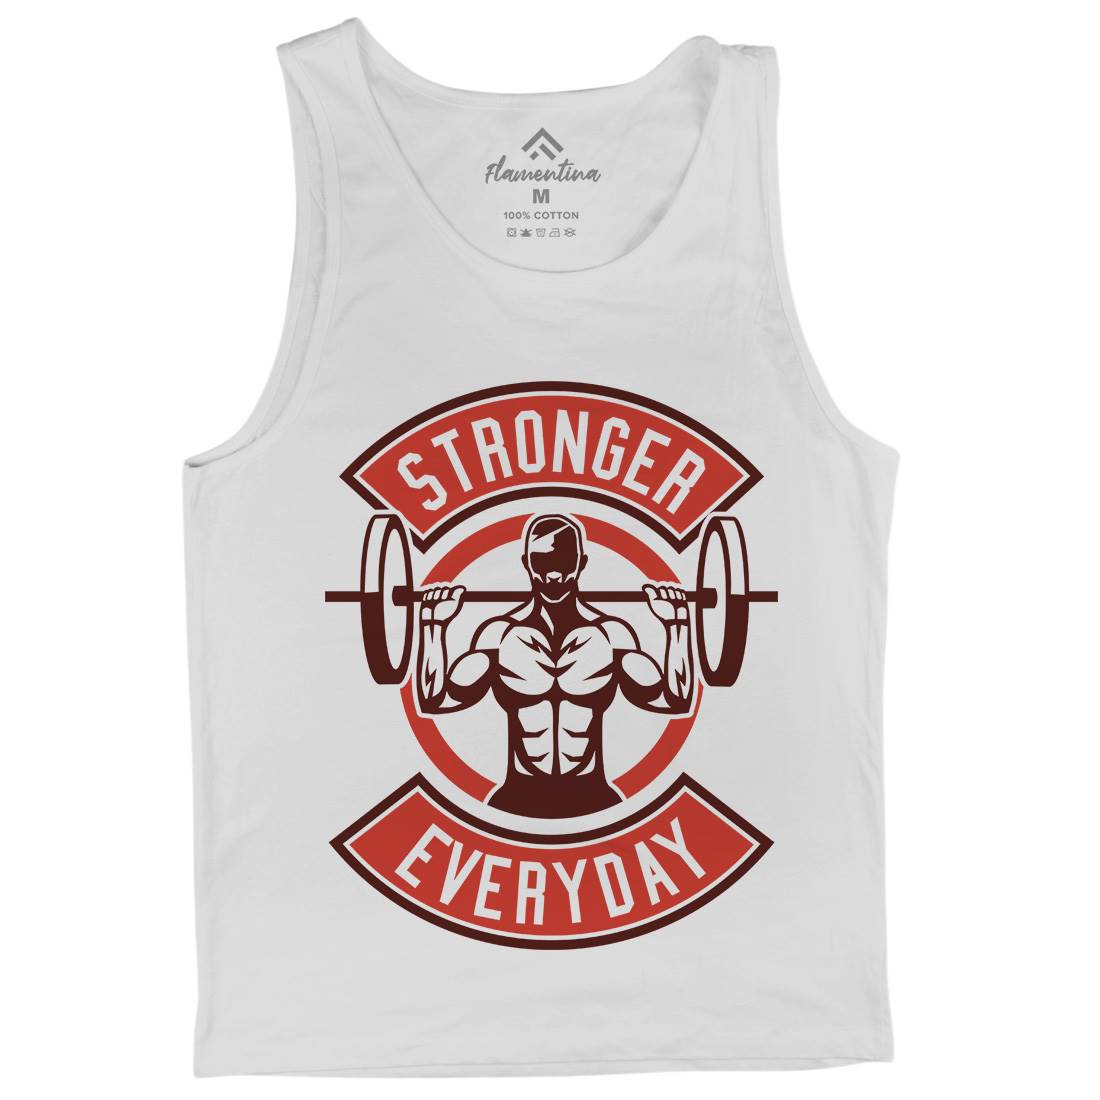 Stronger Everyday Mens Tank Top Vest Gym A289